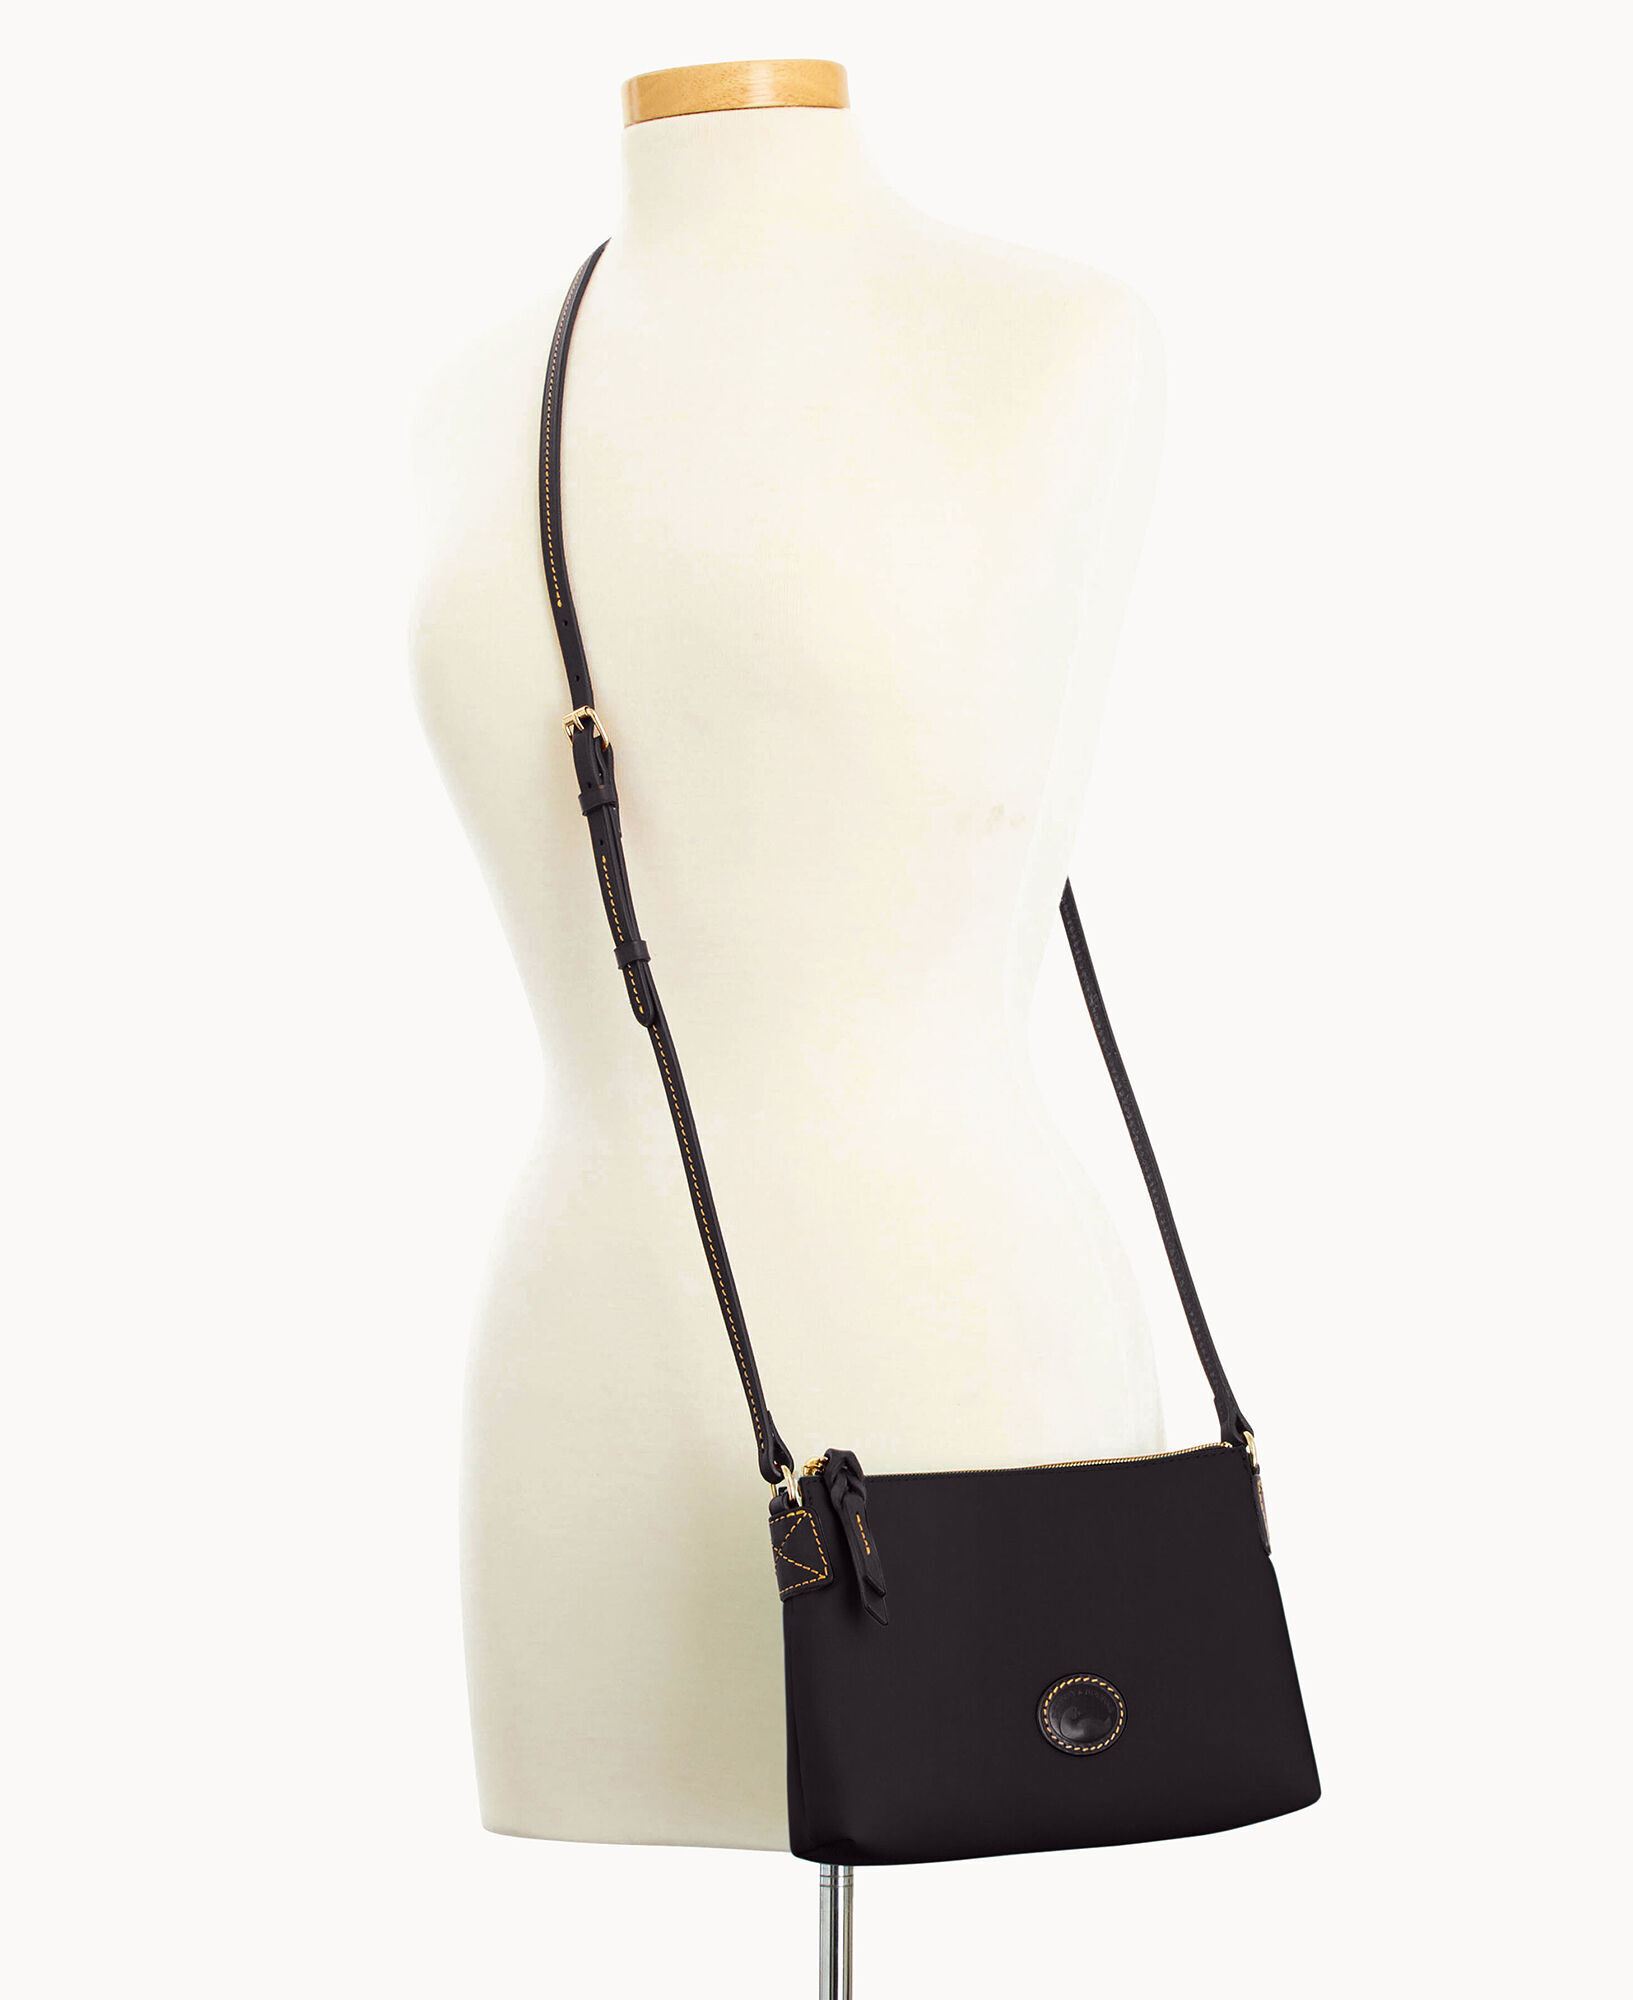 I'm looking for a shorter crossbody chain for my mini pochette